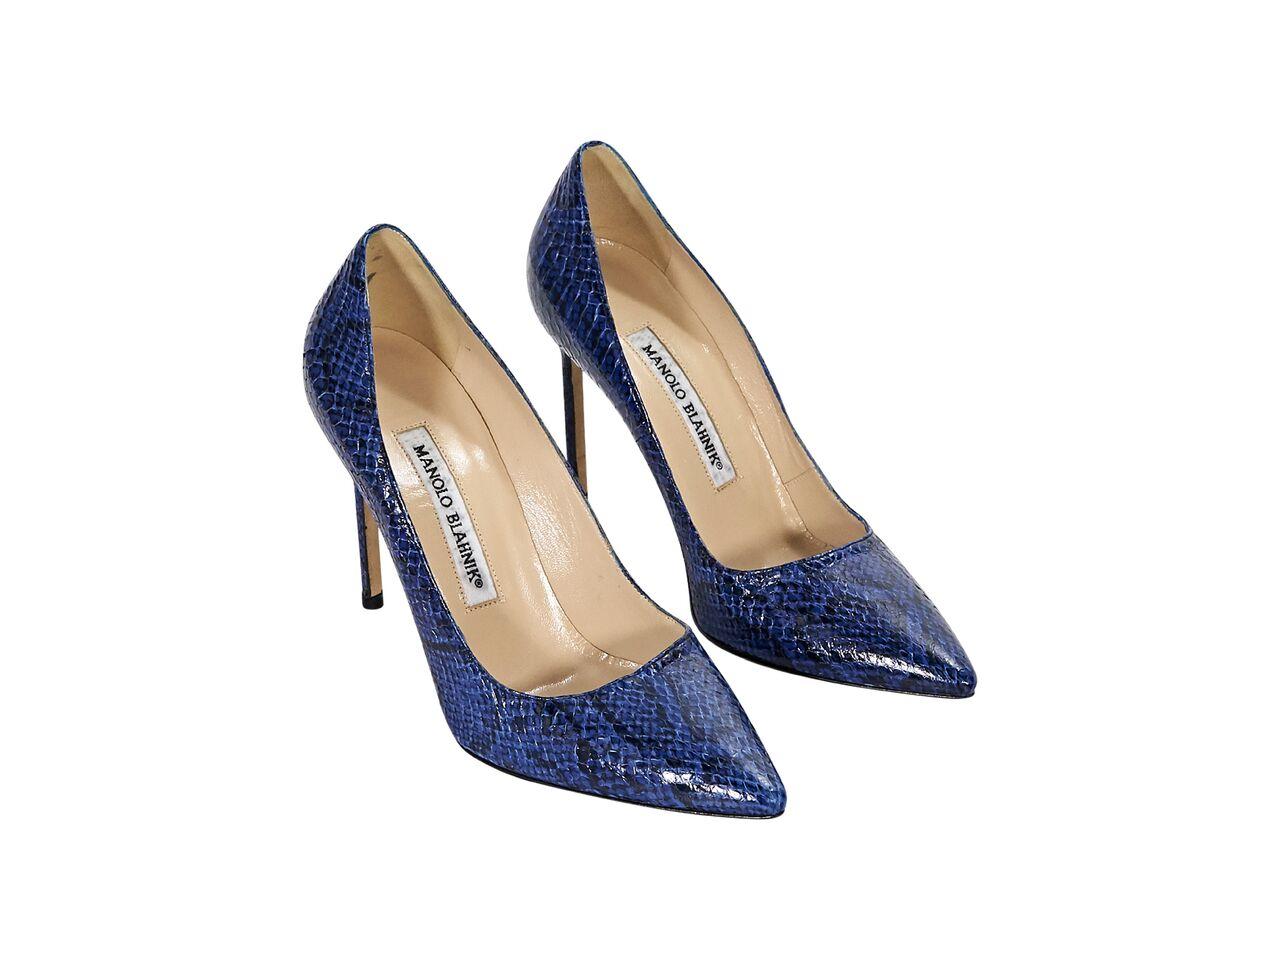 Product details:  Electric blue snakeskin pumps by Manolo Blahnik.  Point toe.  Slip-on style.  4